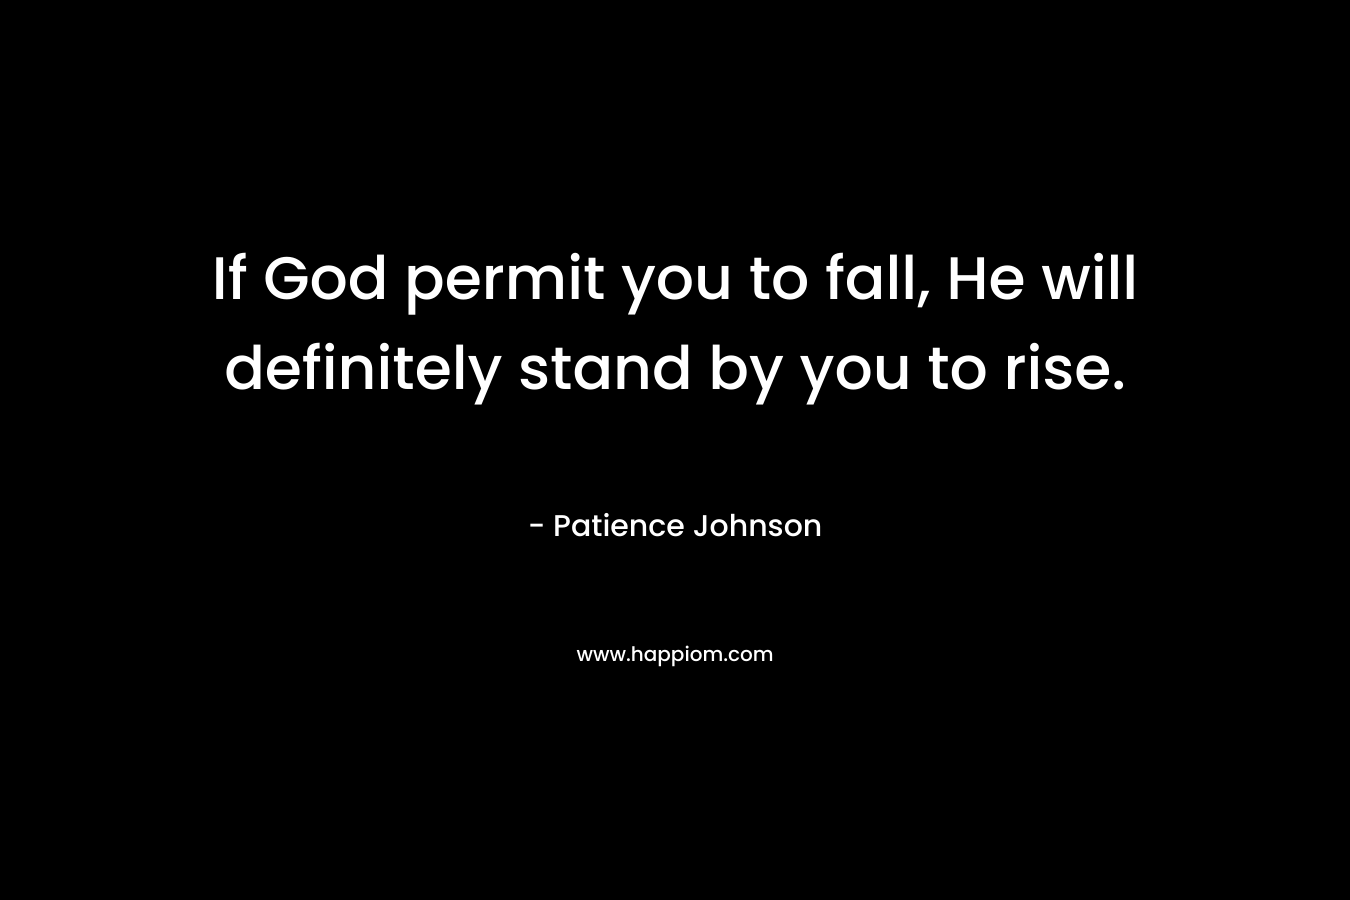 If God permit you to fall, He will definitely stand by you to rise. – Patience Johnson